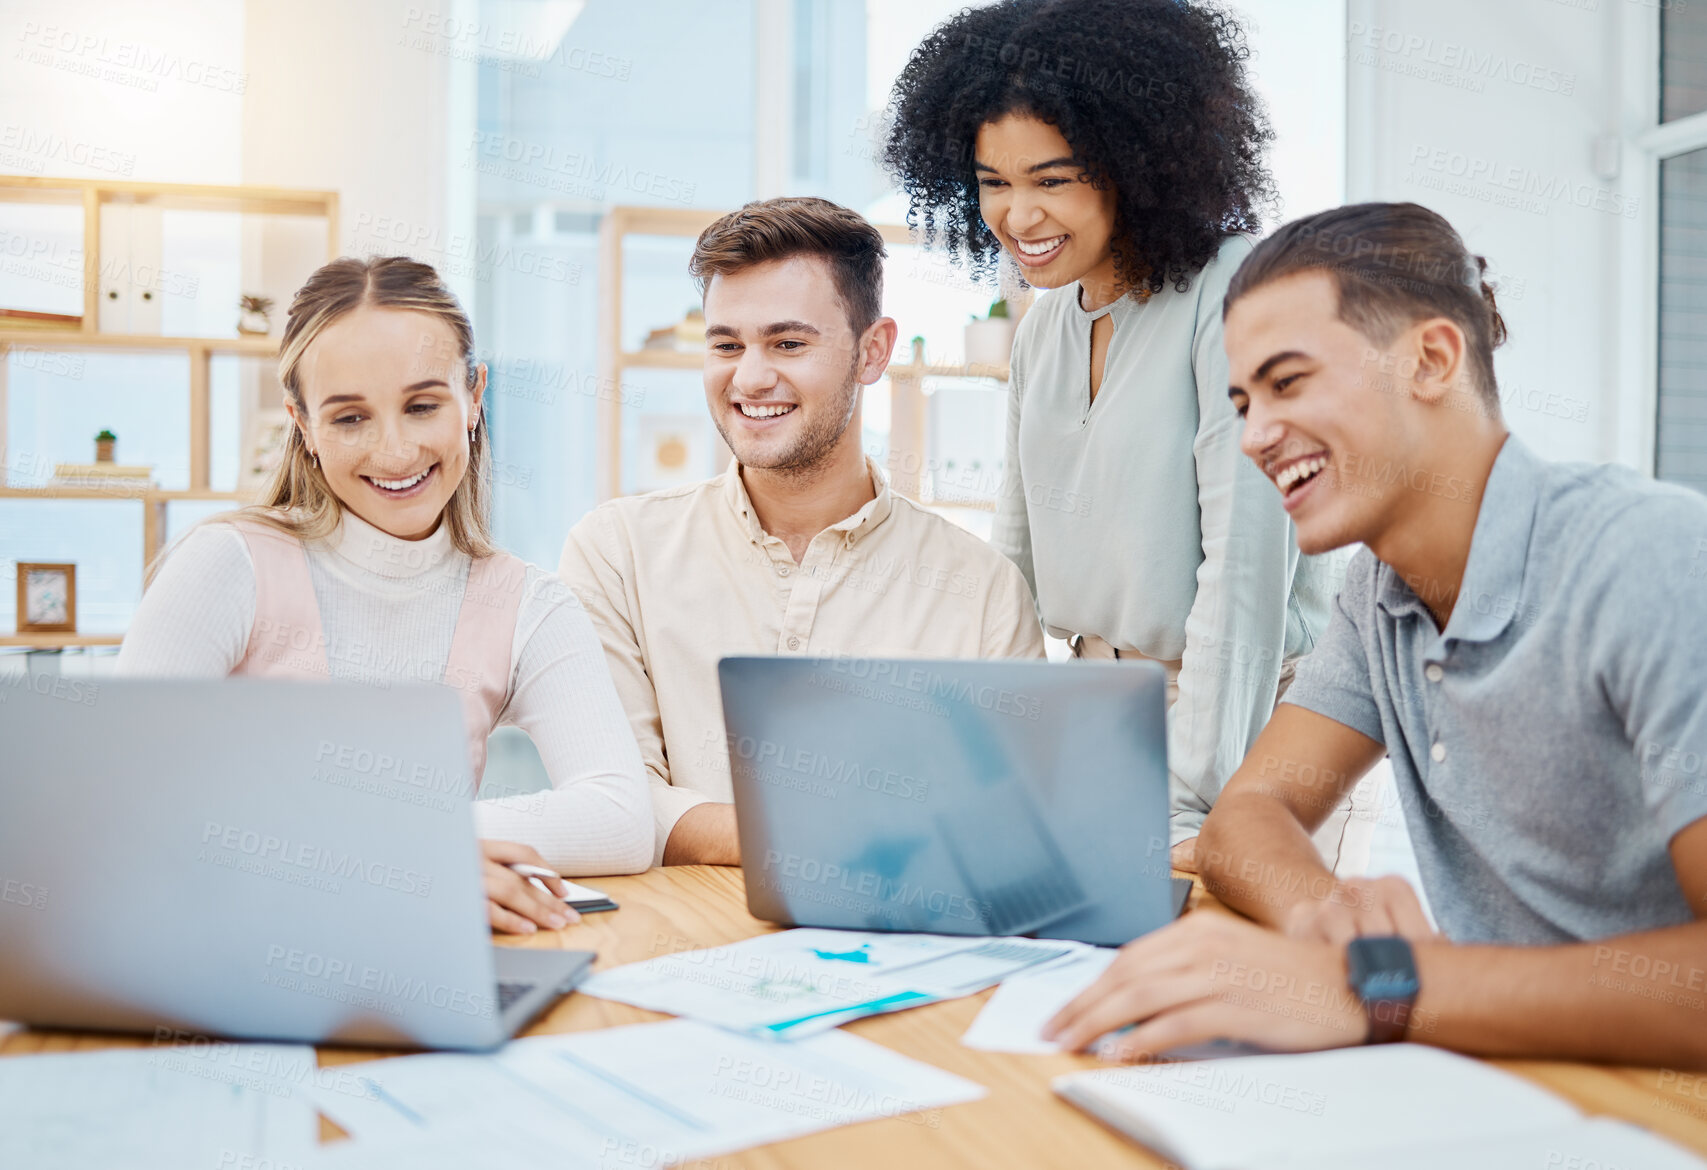 Buy stock photo Happy team collaboration and teamwork by business people watching a laptop and waiting for results or feedback. Diverse group online project with web developers trying new cad technology in an office